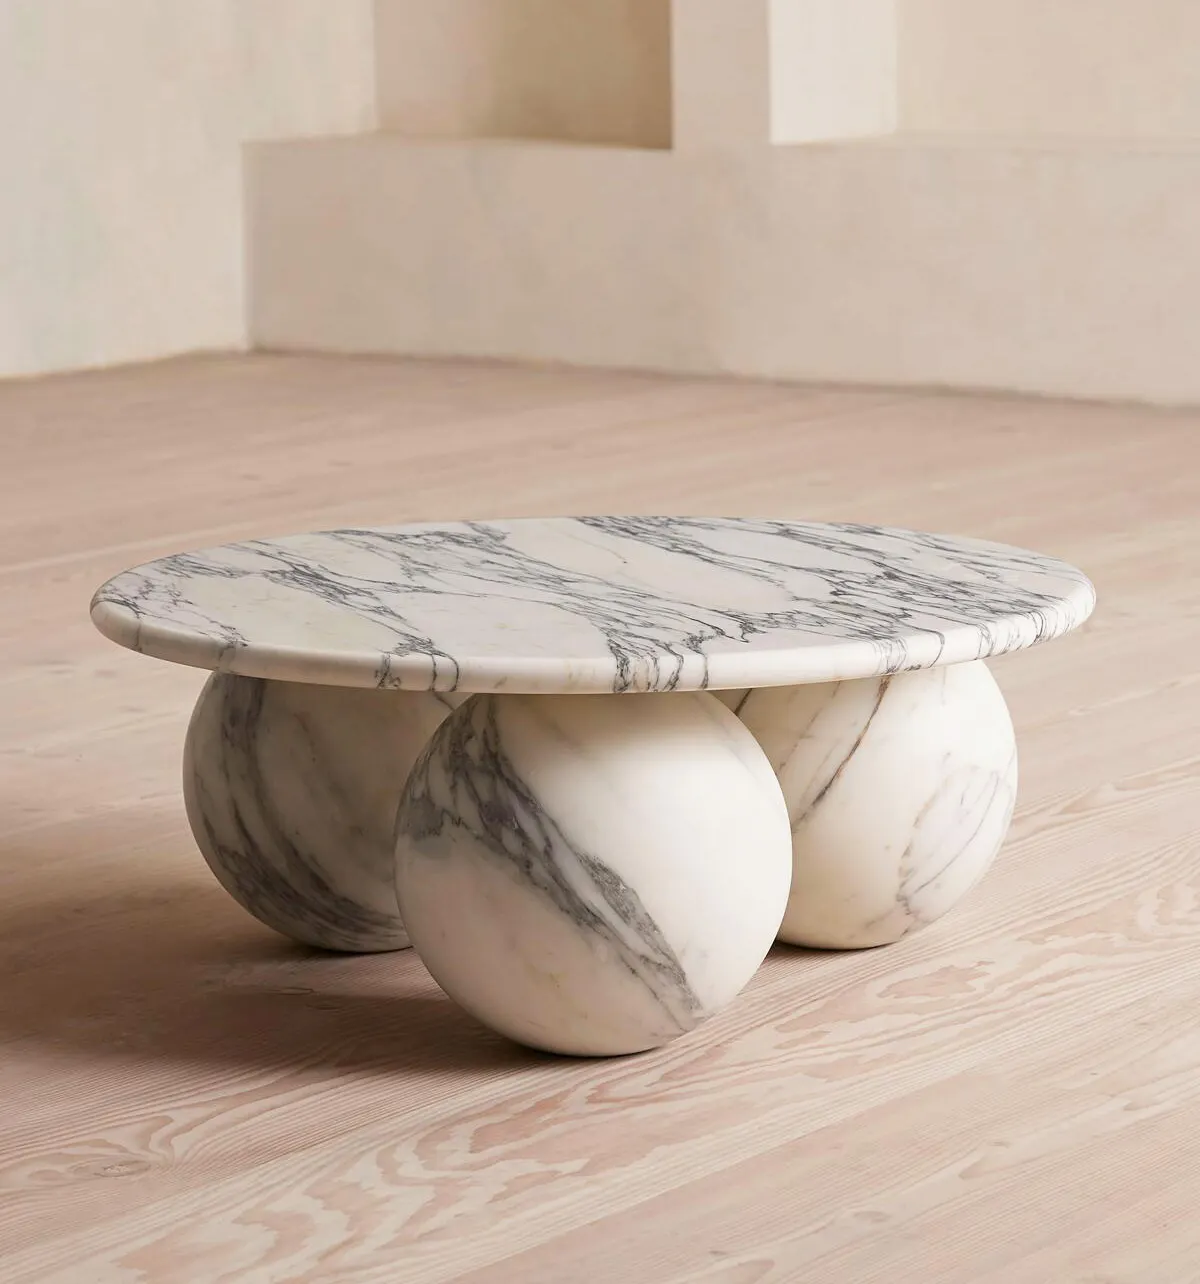 Modern Living Room Stone Furniture Round Table Top Sphere Balls Leg White Marble Coffee Table Sofa Center Table Basses